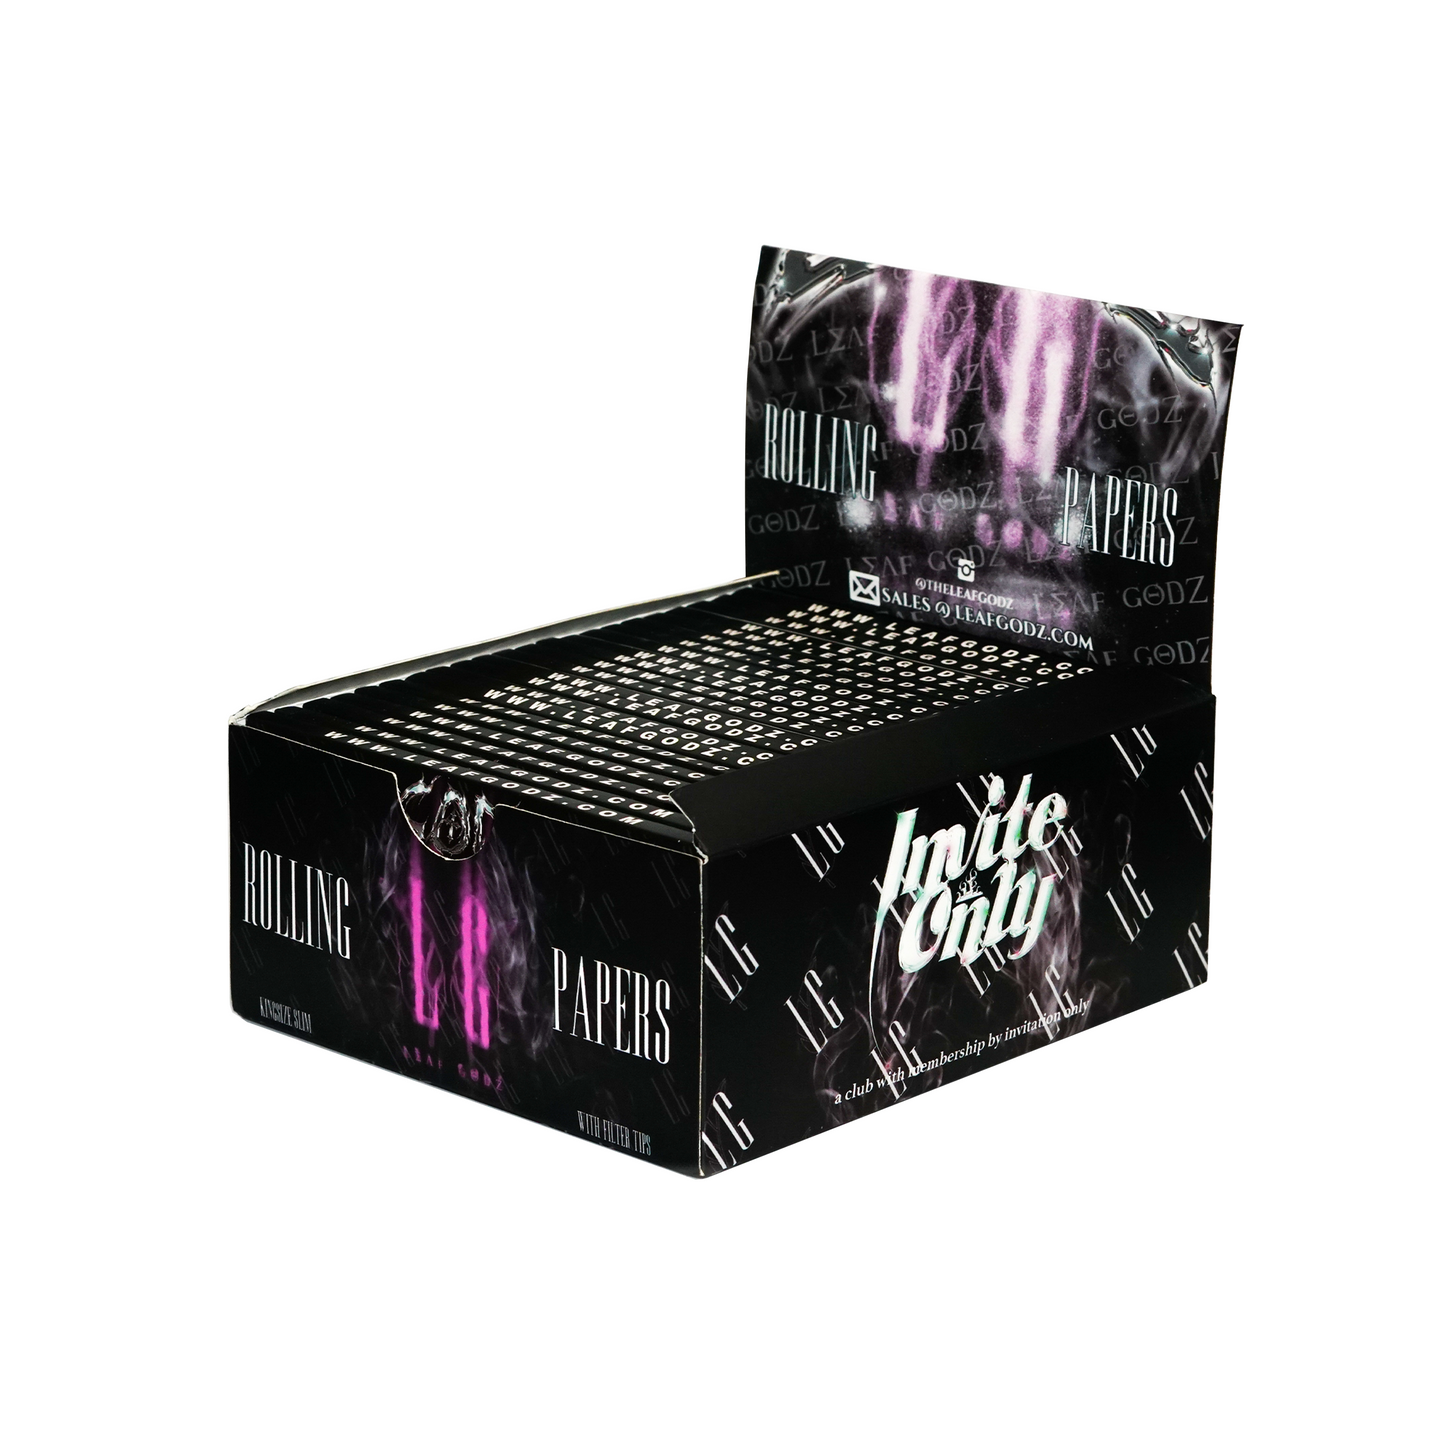 22 Booklet Box Hemp Rolling Papers With Filters